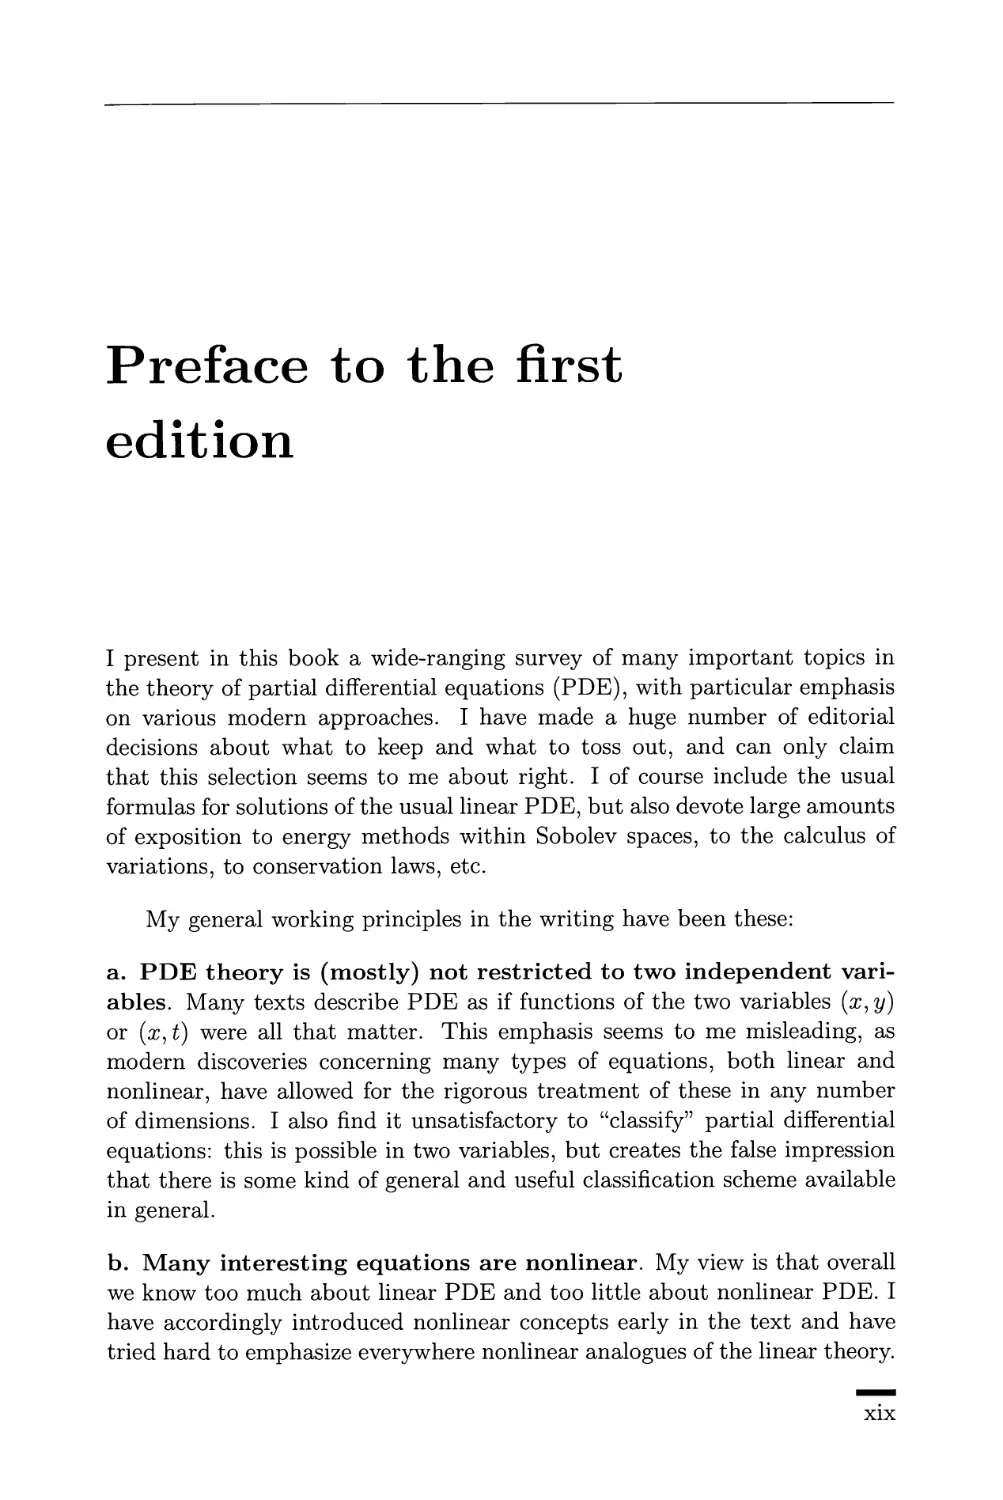 Preface to first edition